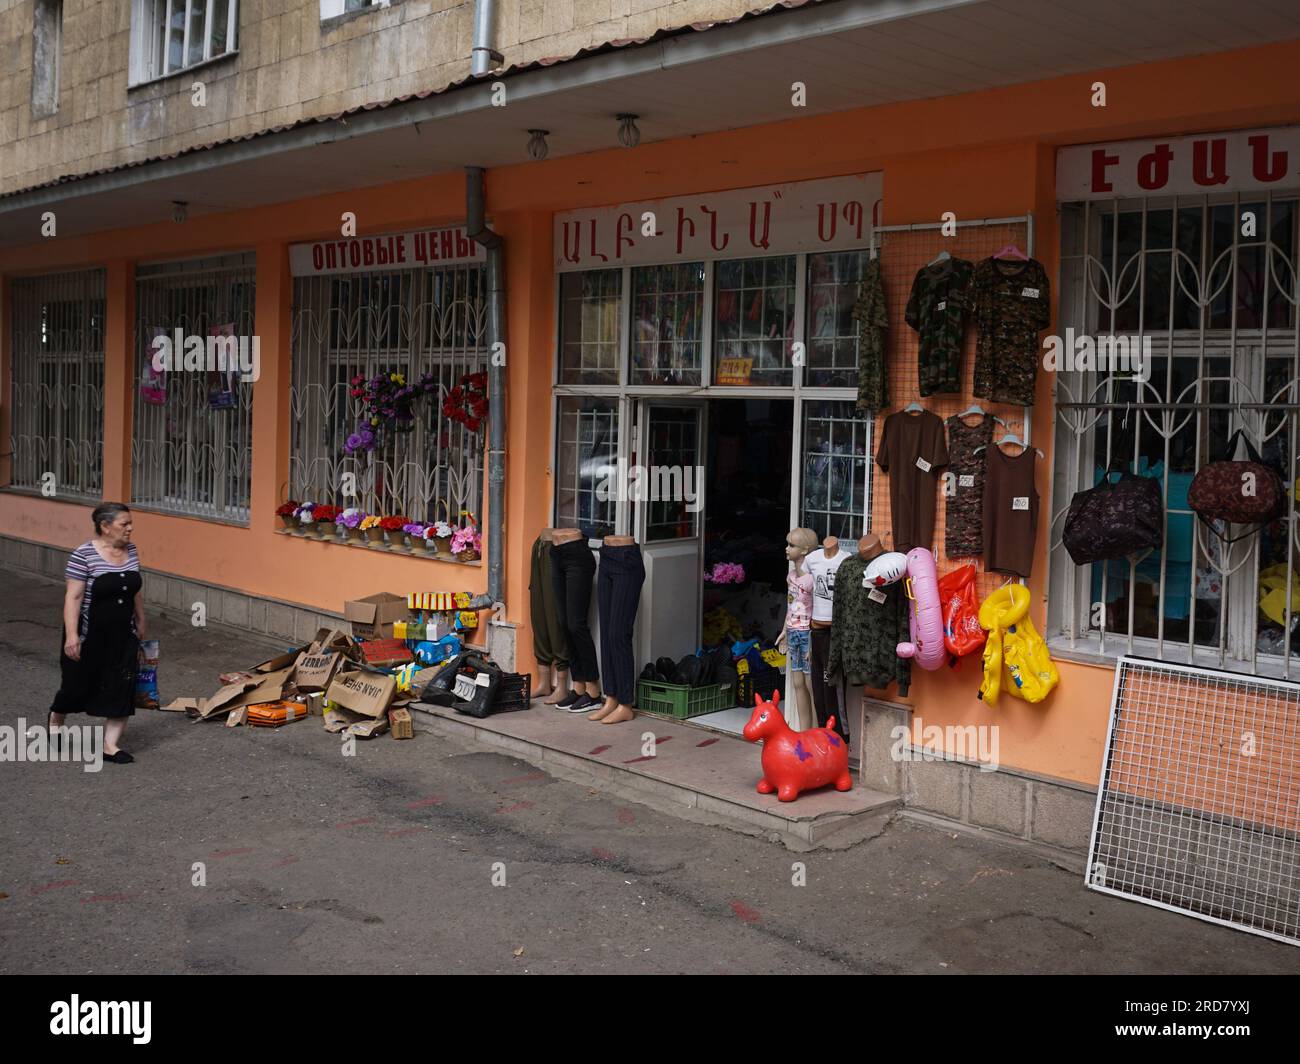 A woman seen walking past a store on the street of Stepanakert,  Nagorno-Karabakh. The unrecognised yet de facto independent country in  South Caucasus, Nagorno-Karabakh (also known as Artsakh) has been in the